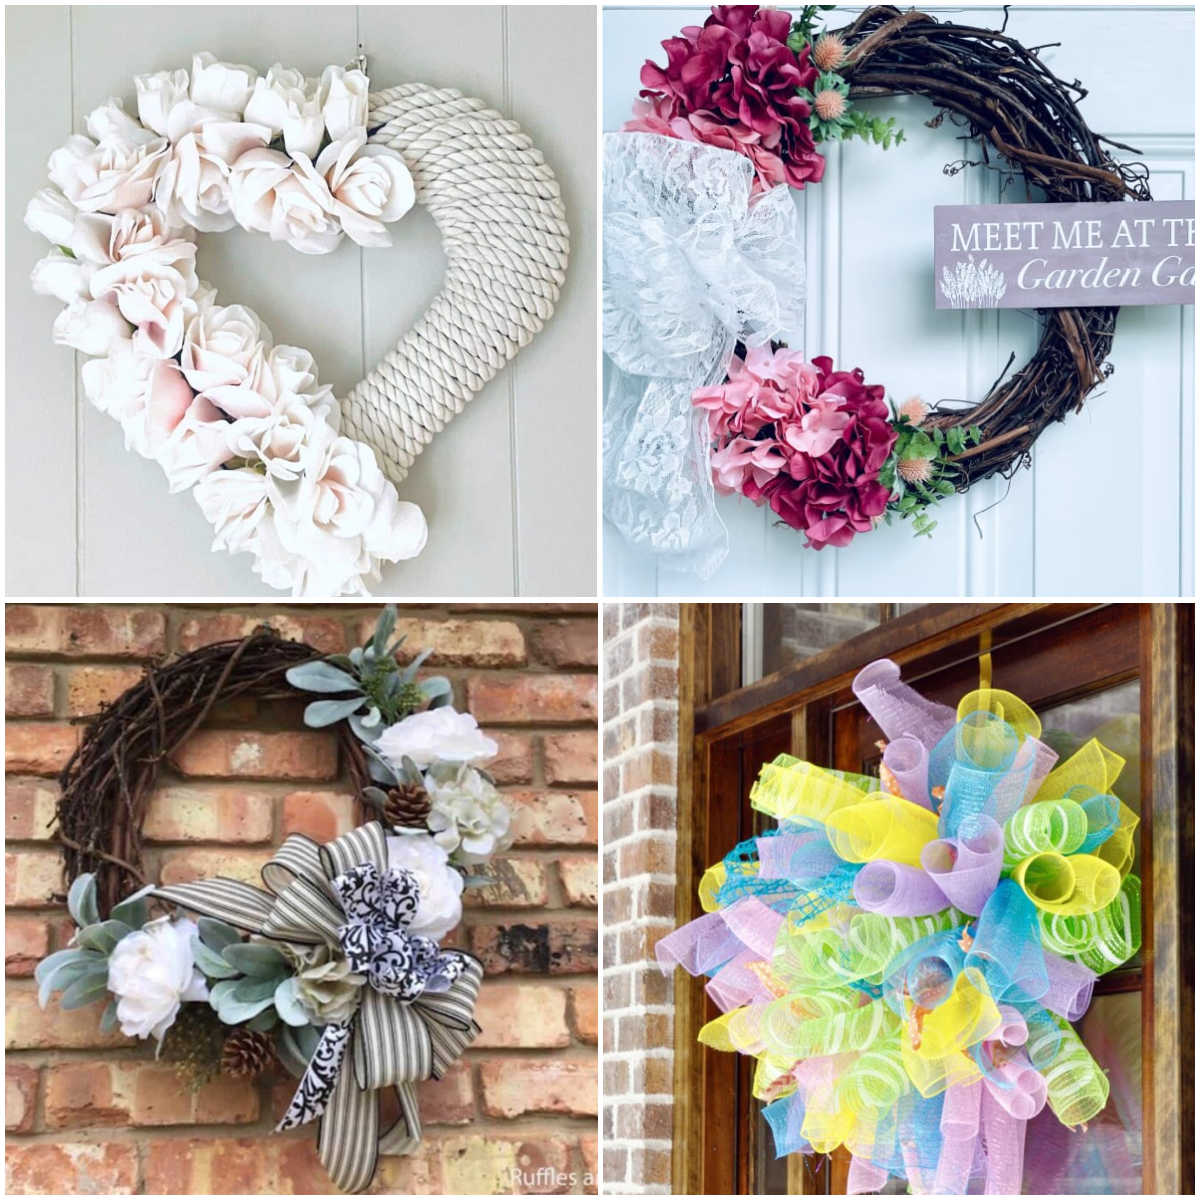 Collage: top left heart wreath, top right hydrangea wreath, bottom right wreath with springy coils, bottom left grapevine wreath with flowers.